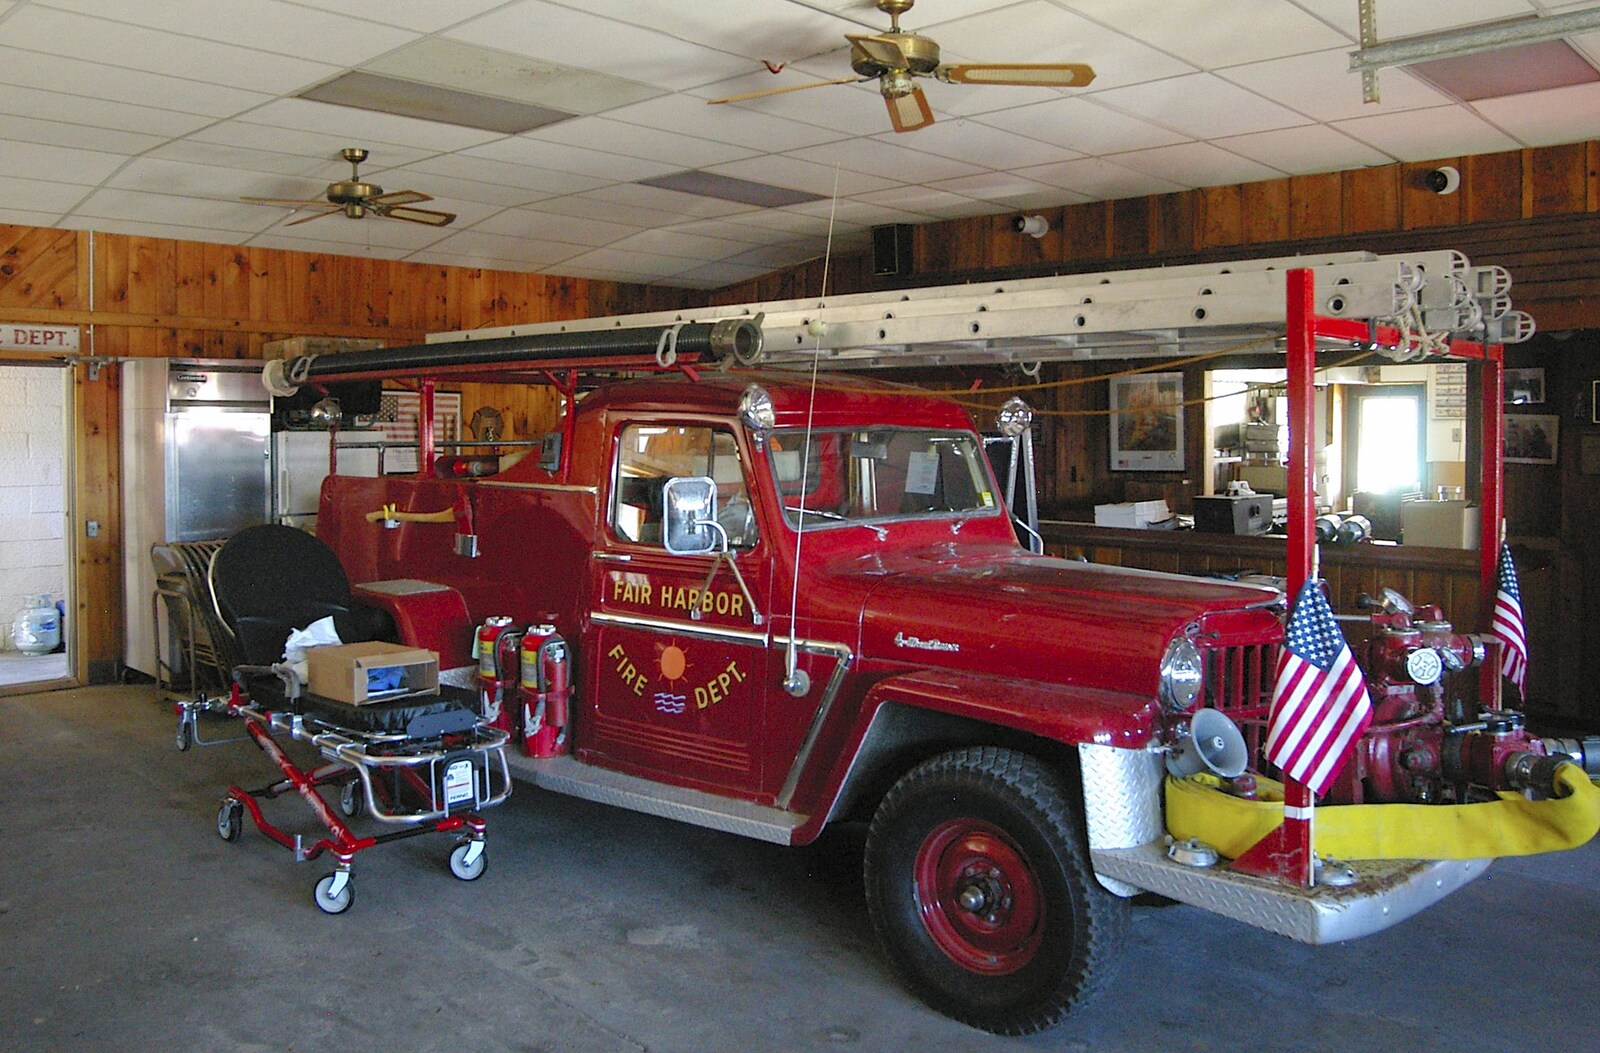 An old fire engine from Phil and the Fair Harbor Fire Engine, Fire Island, New York State, US - 30th April 2006